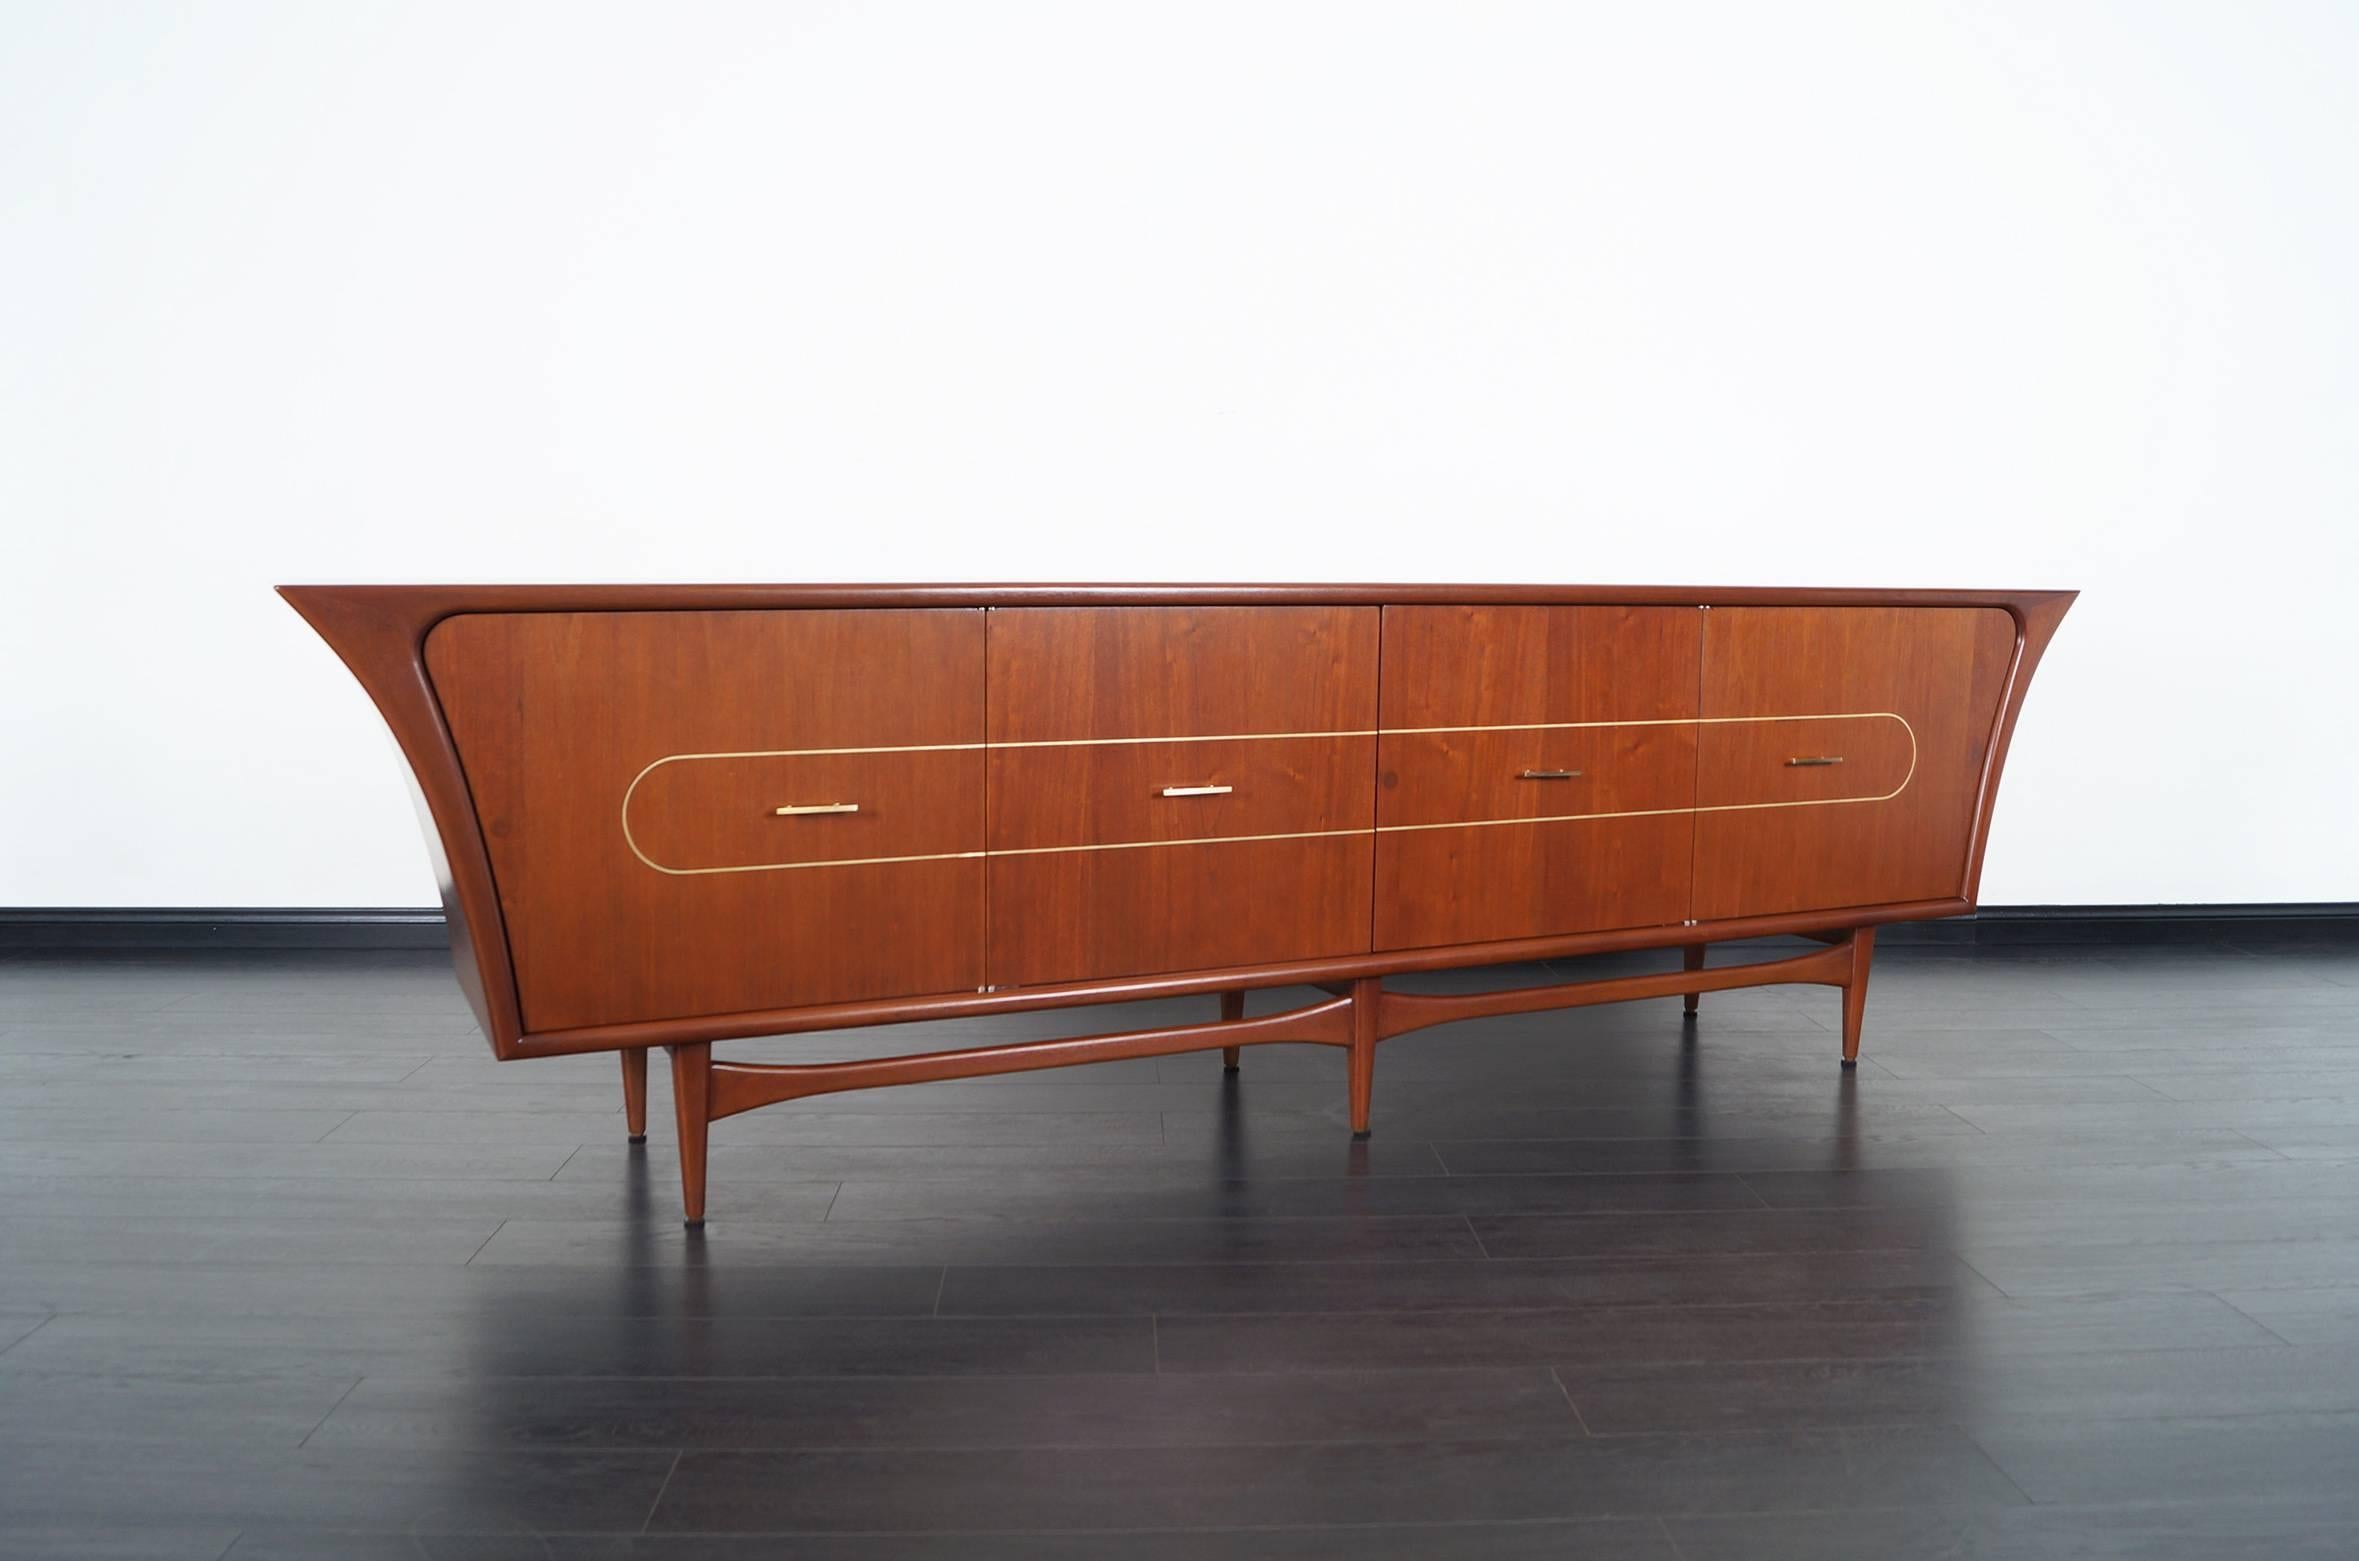 Monumental Mexican modernist credenza designed by Eugenio Escudero. This spectacular credenza is simply amazing! Features three shelves, three drawers, and sold brass hardware.